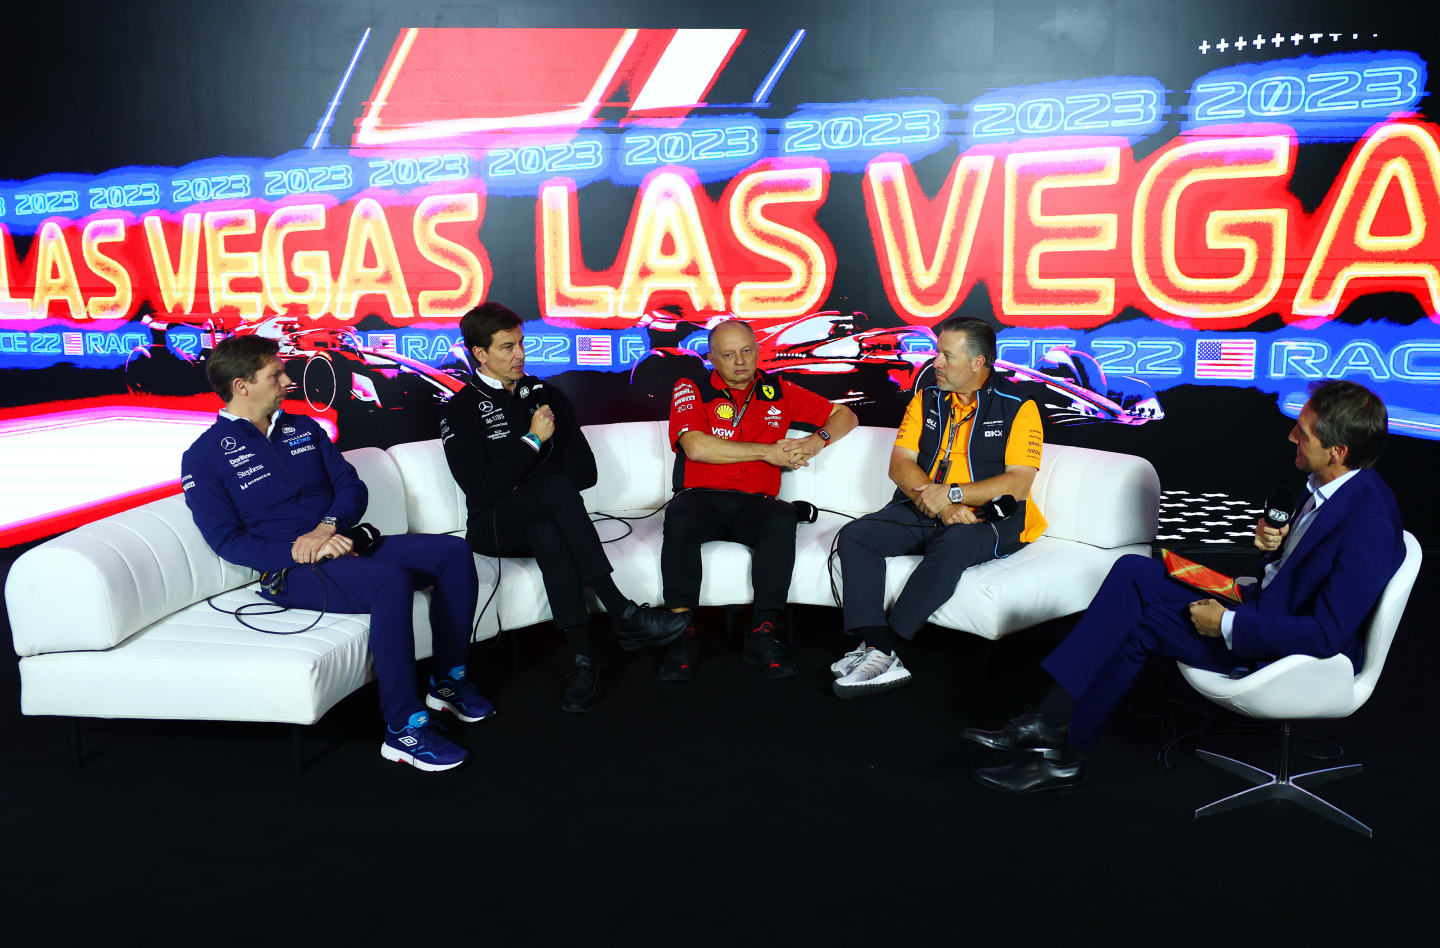 LAS VEGAS, NEVADA - NOVEMBER 16: James Vowles, Team Principal of Williams, Mercedes GP Executive Director Toto Wolff, Ferrari Team Principal Frederic Vasseur and McLaren Chief Executive Officer Zak Brown attend a Team Principals Press Conference ahead of the F1 Grand Prix of Las Vegas at Las Vegas Strip Circuit on November 16, 2023 in Las Vegas, Nevada. (Photo by Dan Istitene/Getty Images)